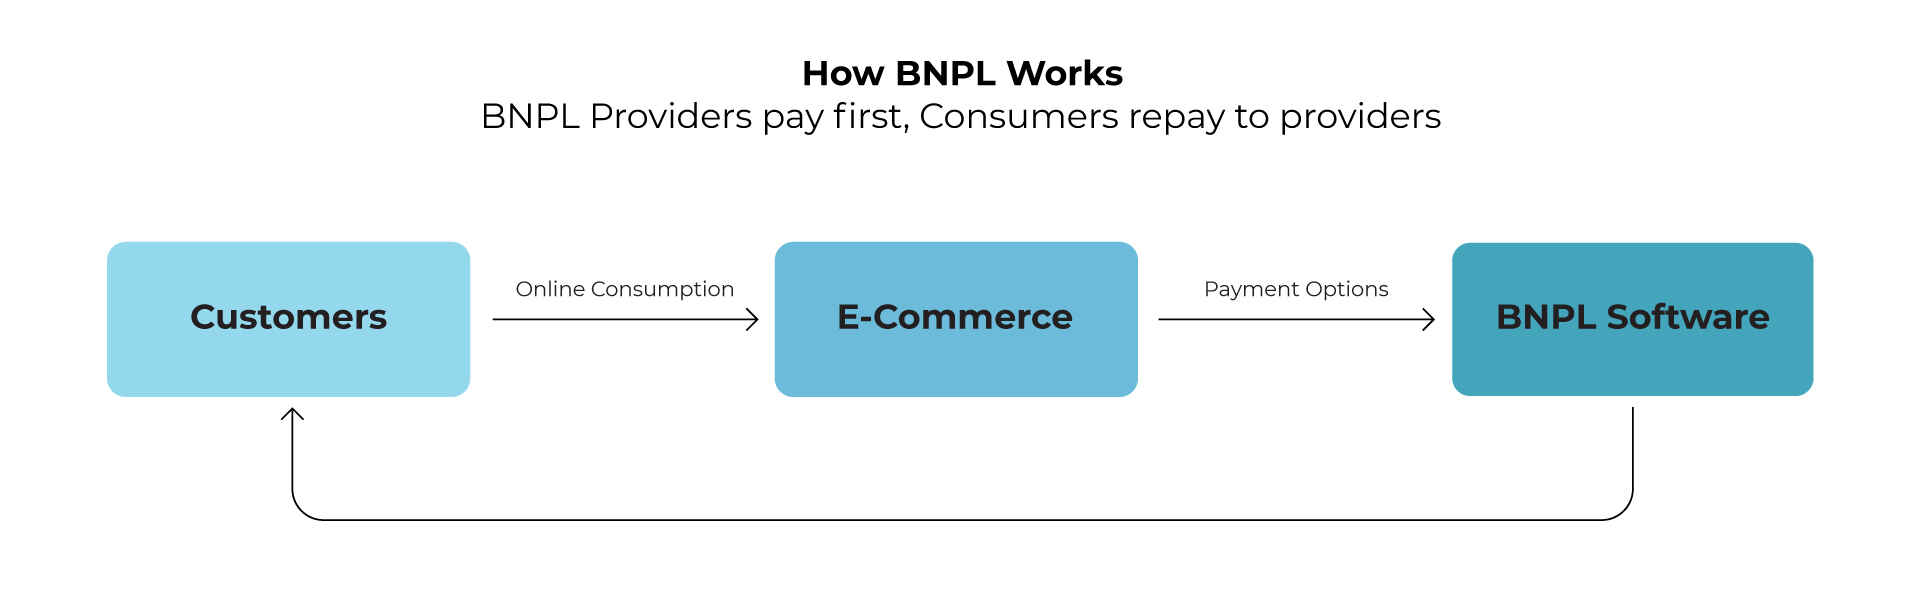 BNPL services allow consumers to purchase and pay for products in installments over time.